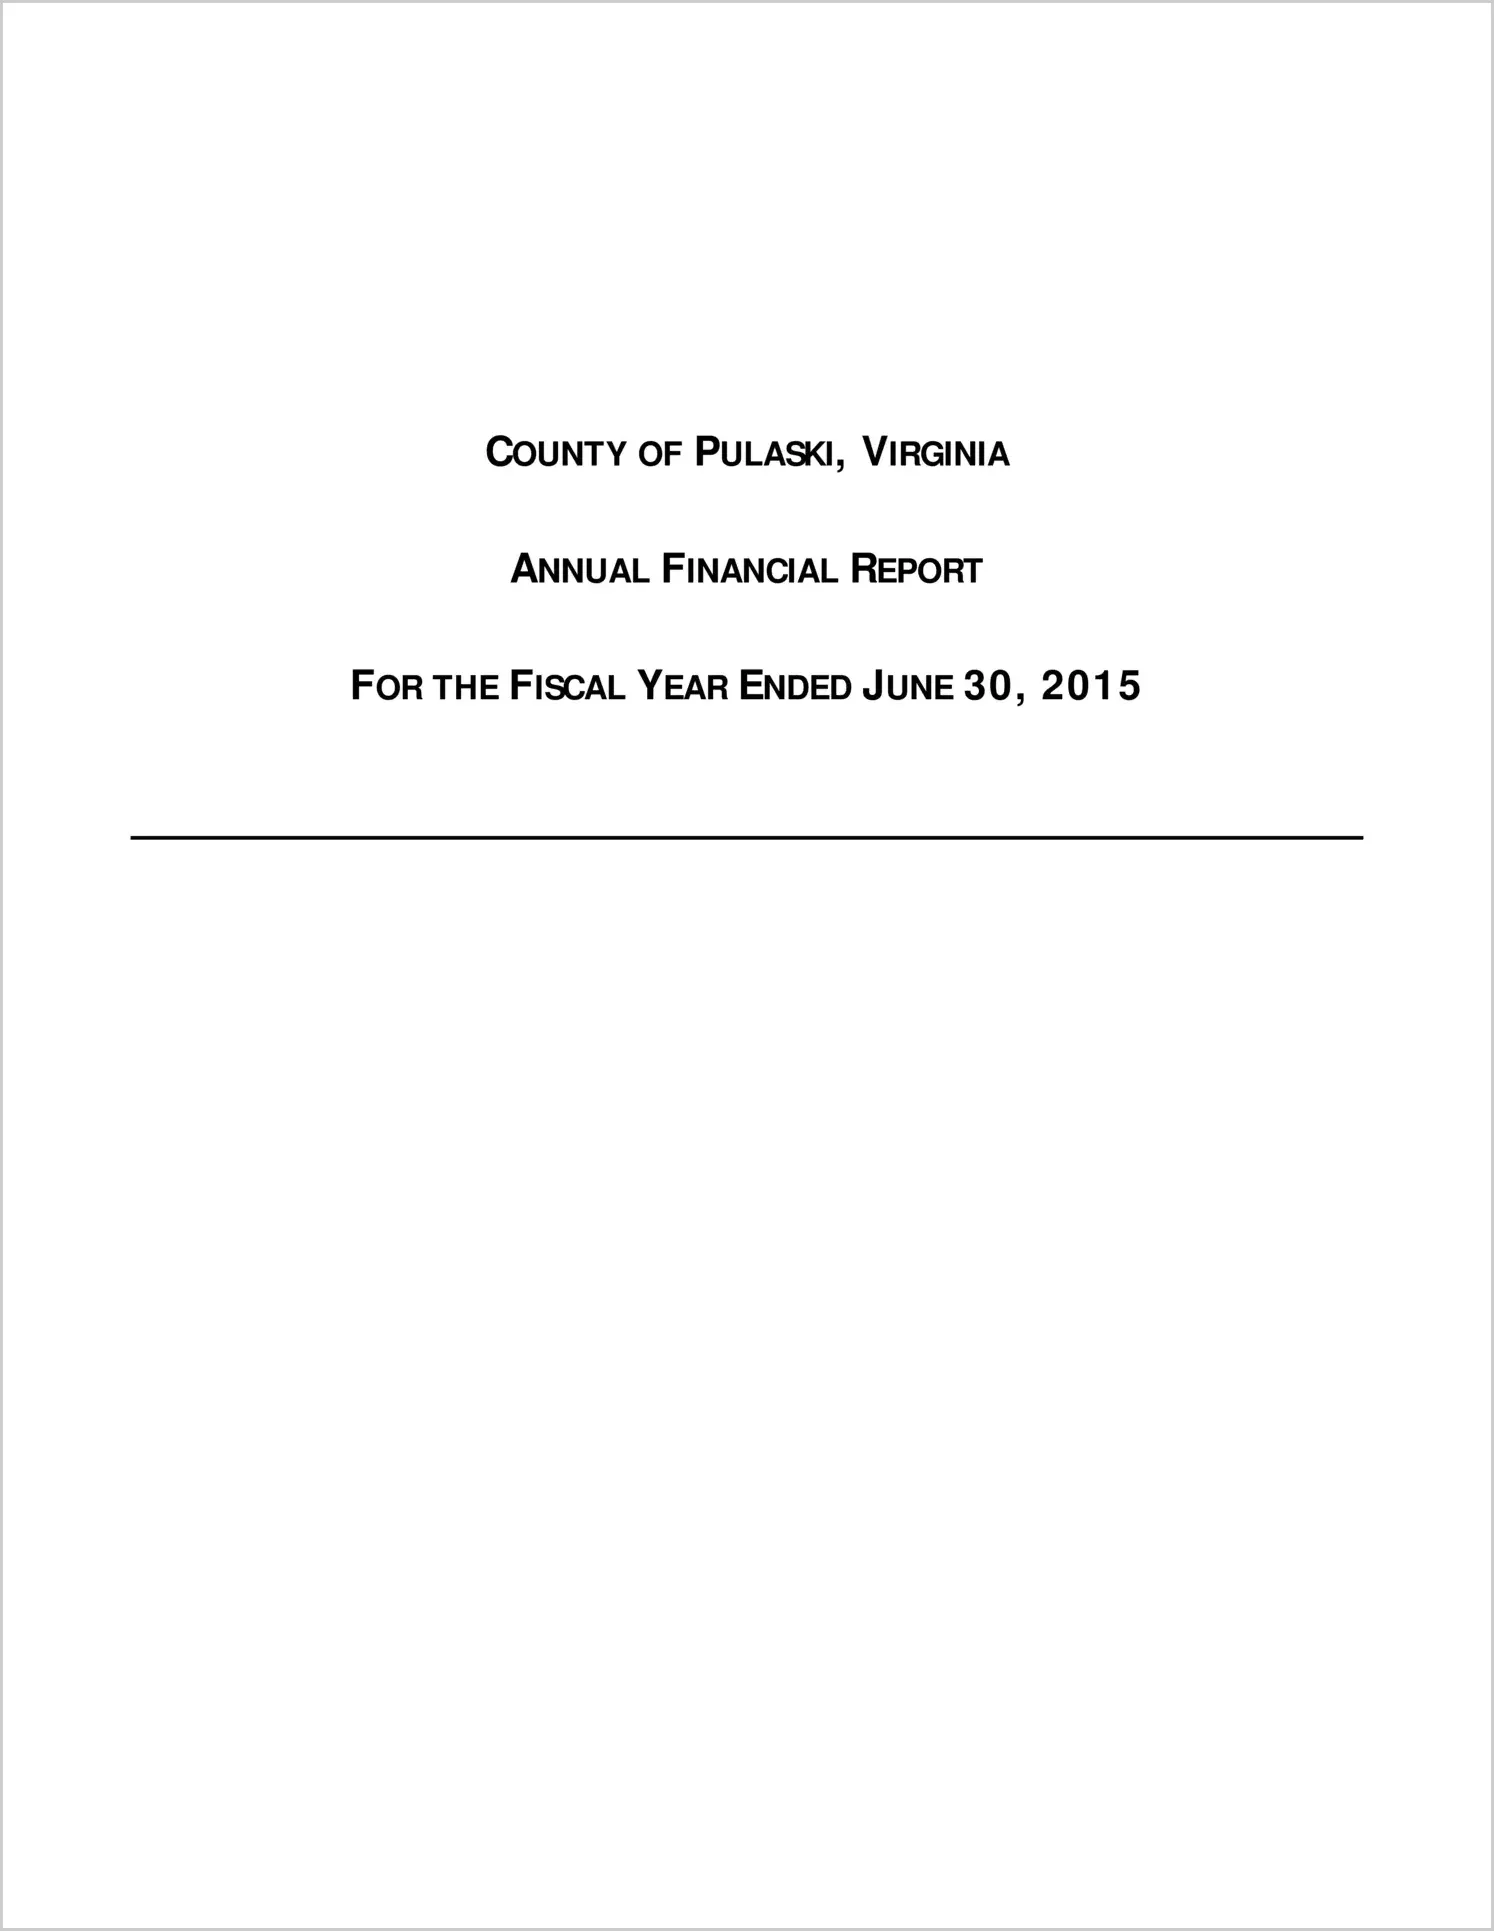 2015 Annual Financial Report for County of Pulaski